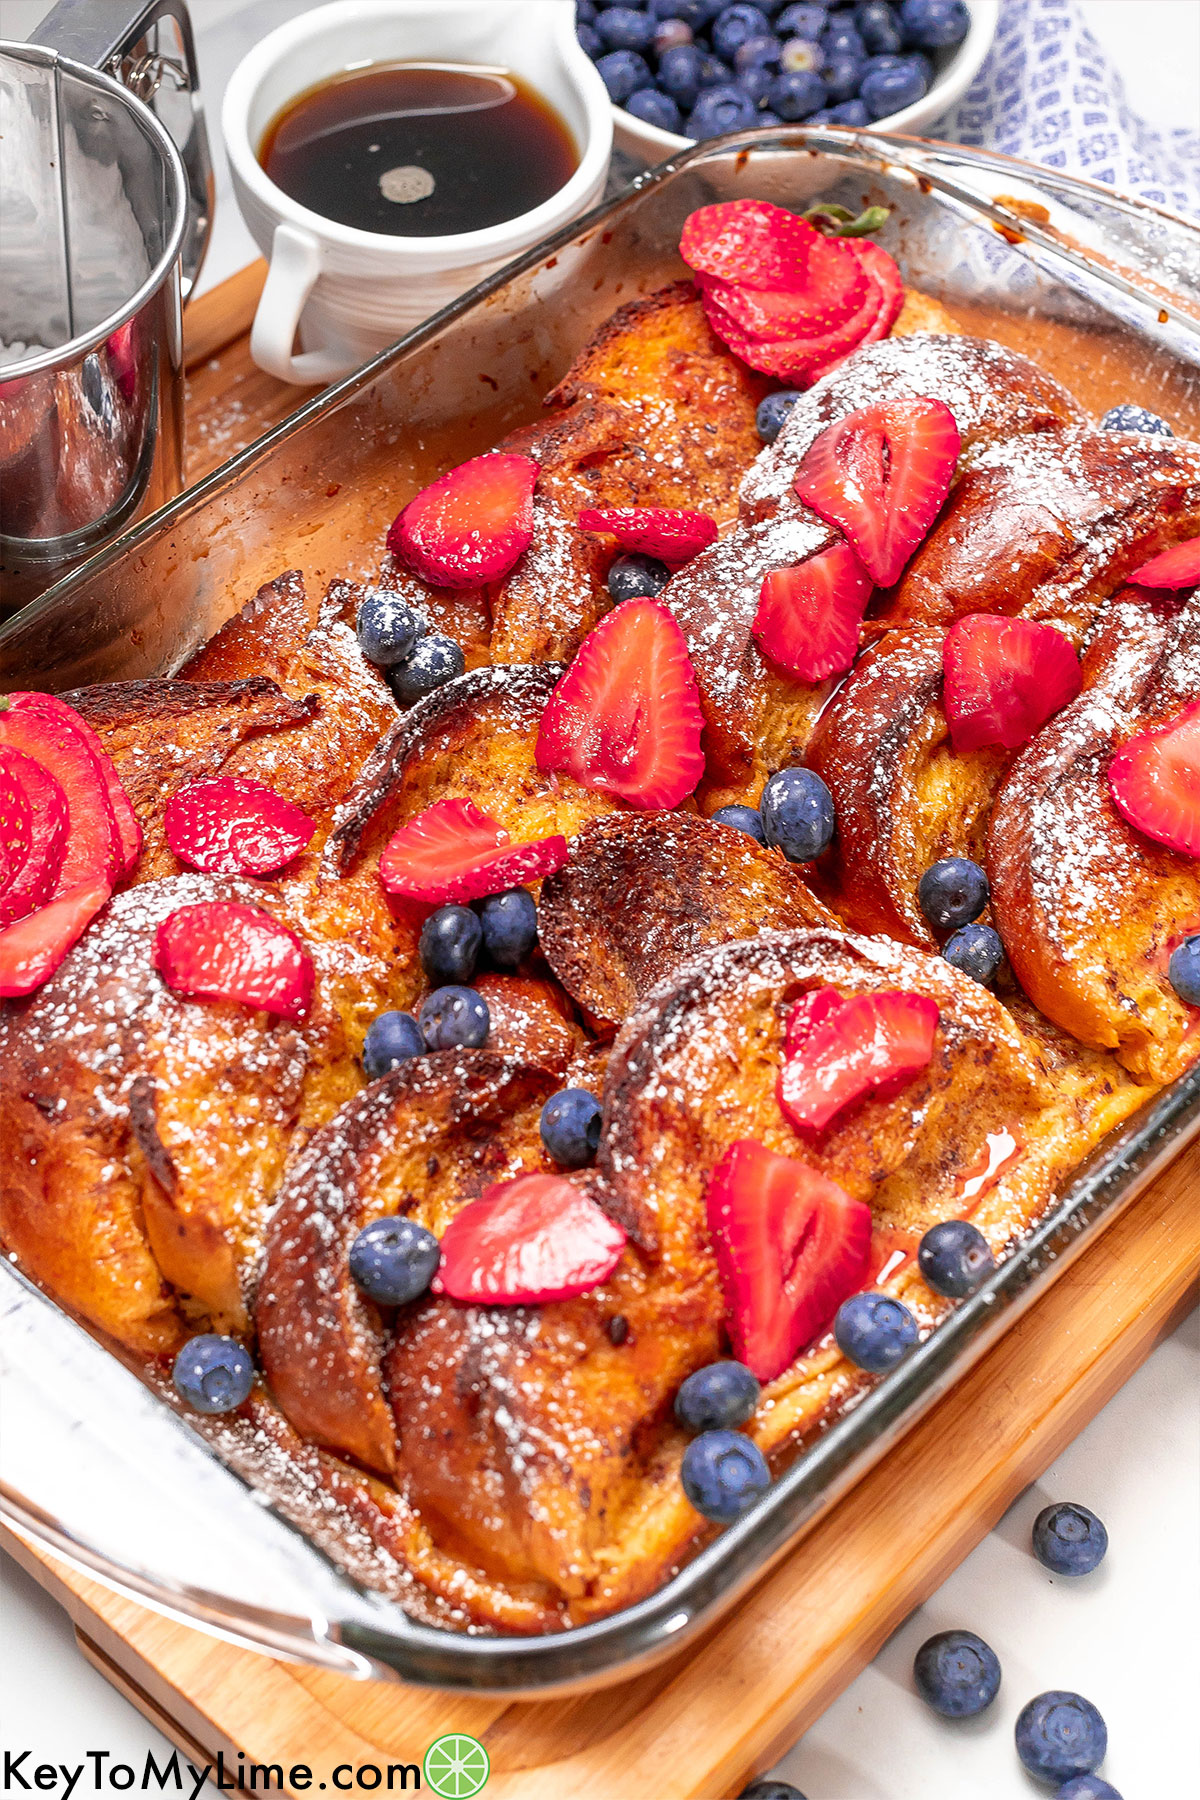 A whole freshly baked French toast casserole garnished with fresh berries, powdered sugar, and maple syrup.